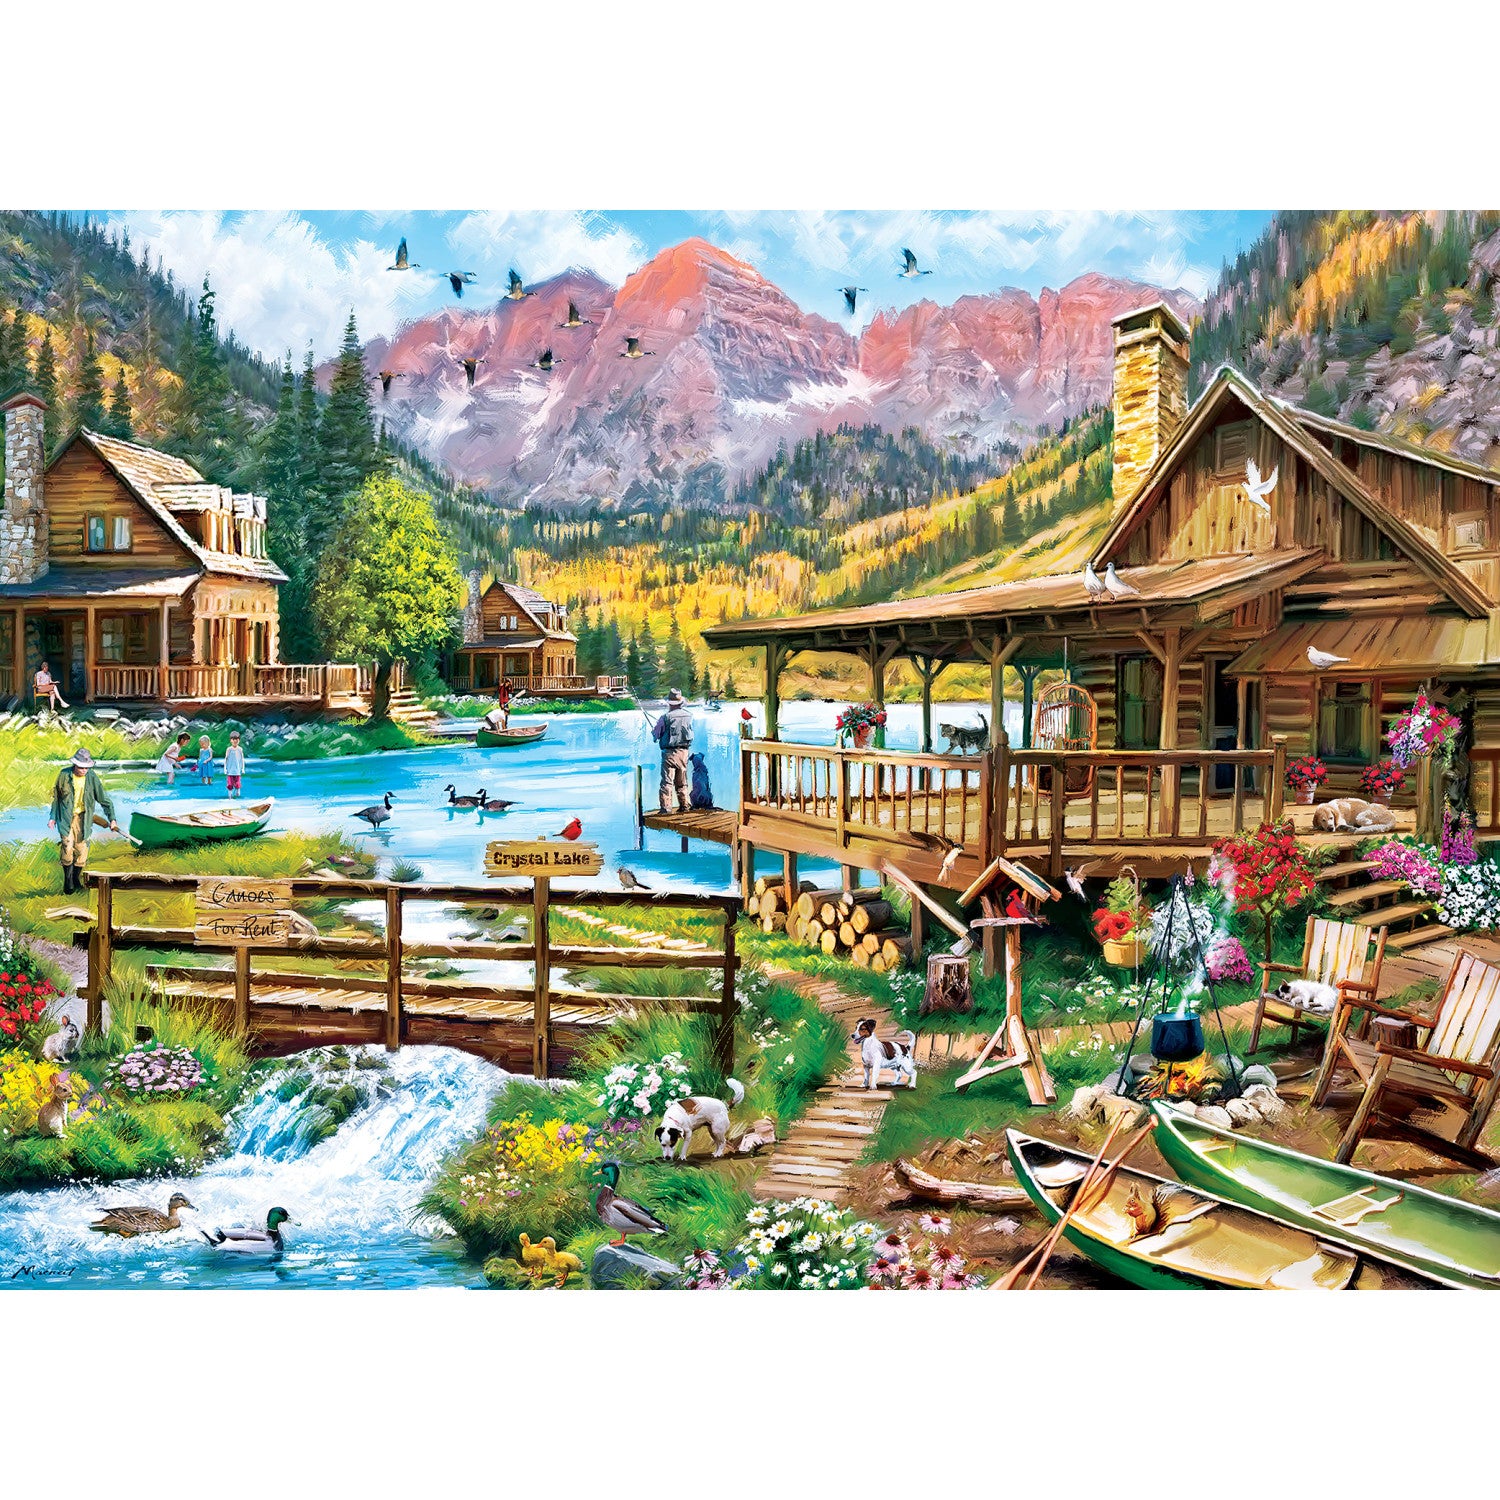 Art Gallery - Canoes for Rent 1000 Piece Puzzle